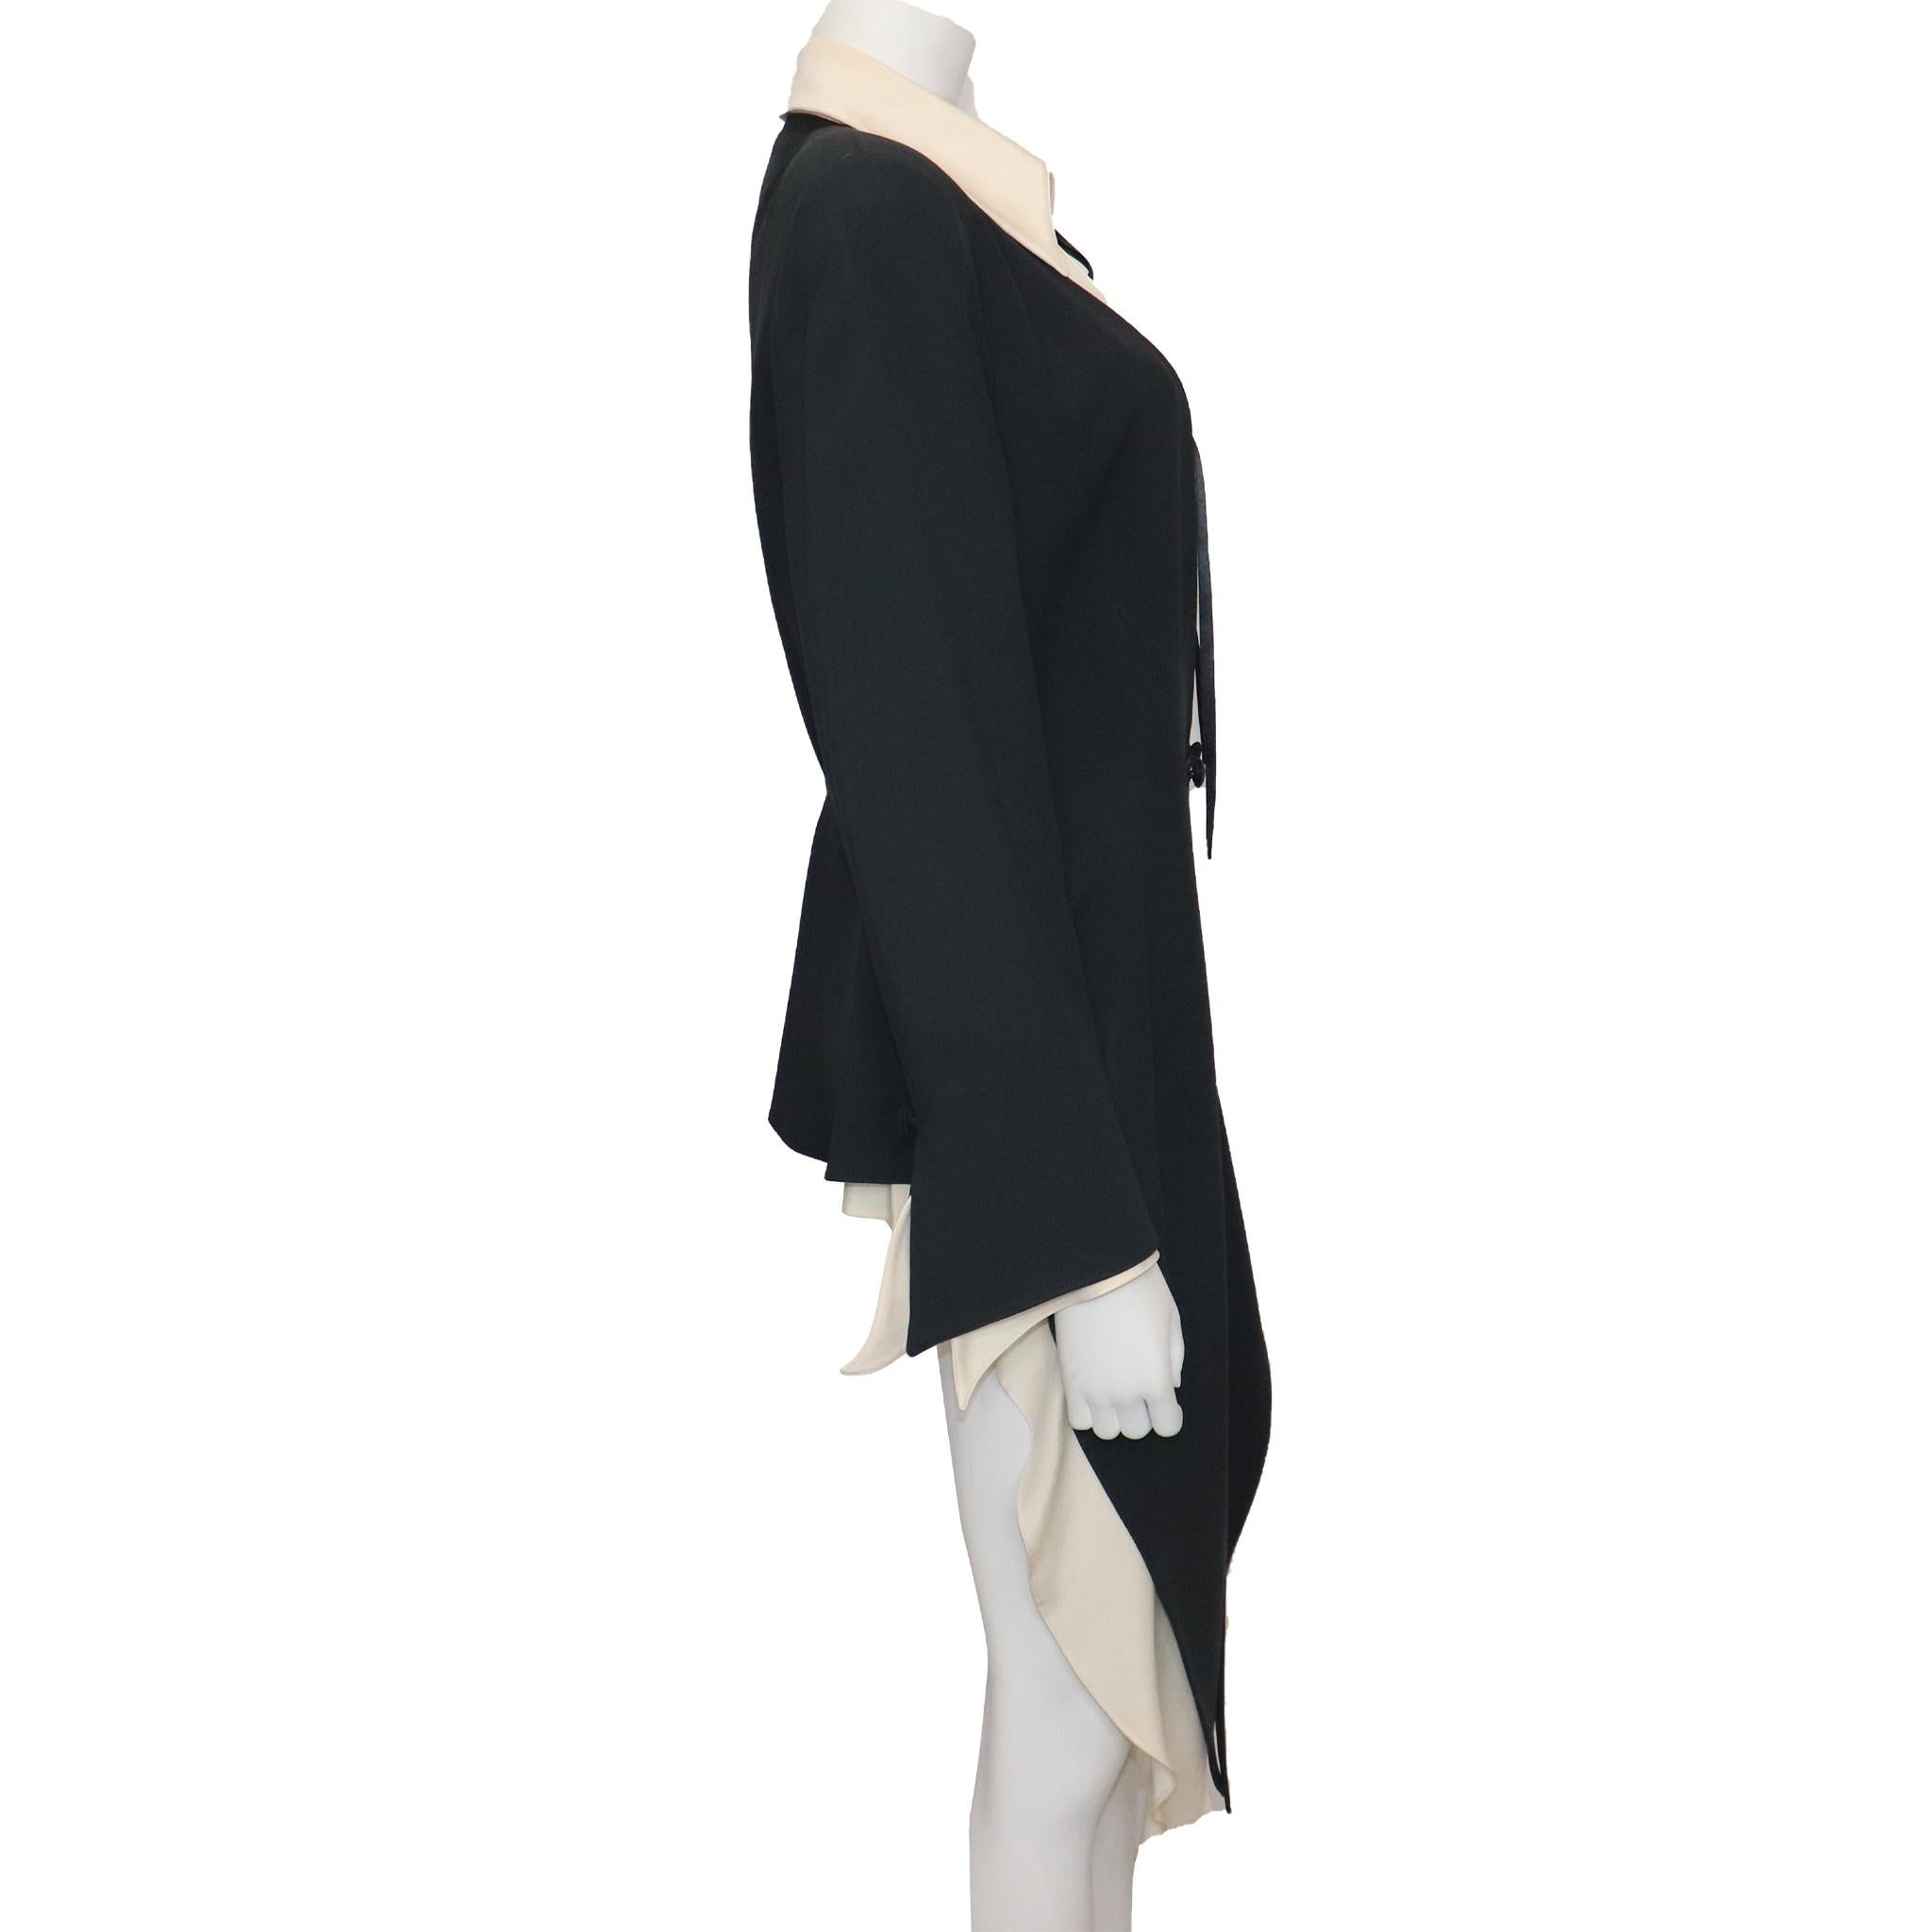 Claude Montana Drape 2PC Black Jacket w/ Cream Blouse Circa 1990s. In excellent condition 

Measurements- 

Size 12

Jacket Length: 46 Inches
Arm Length: 26 Inches